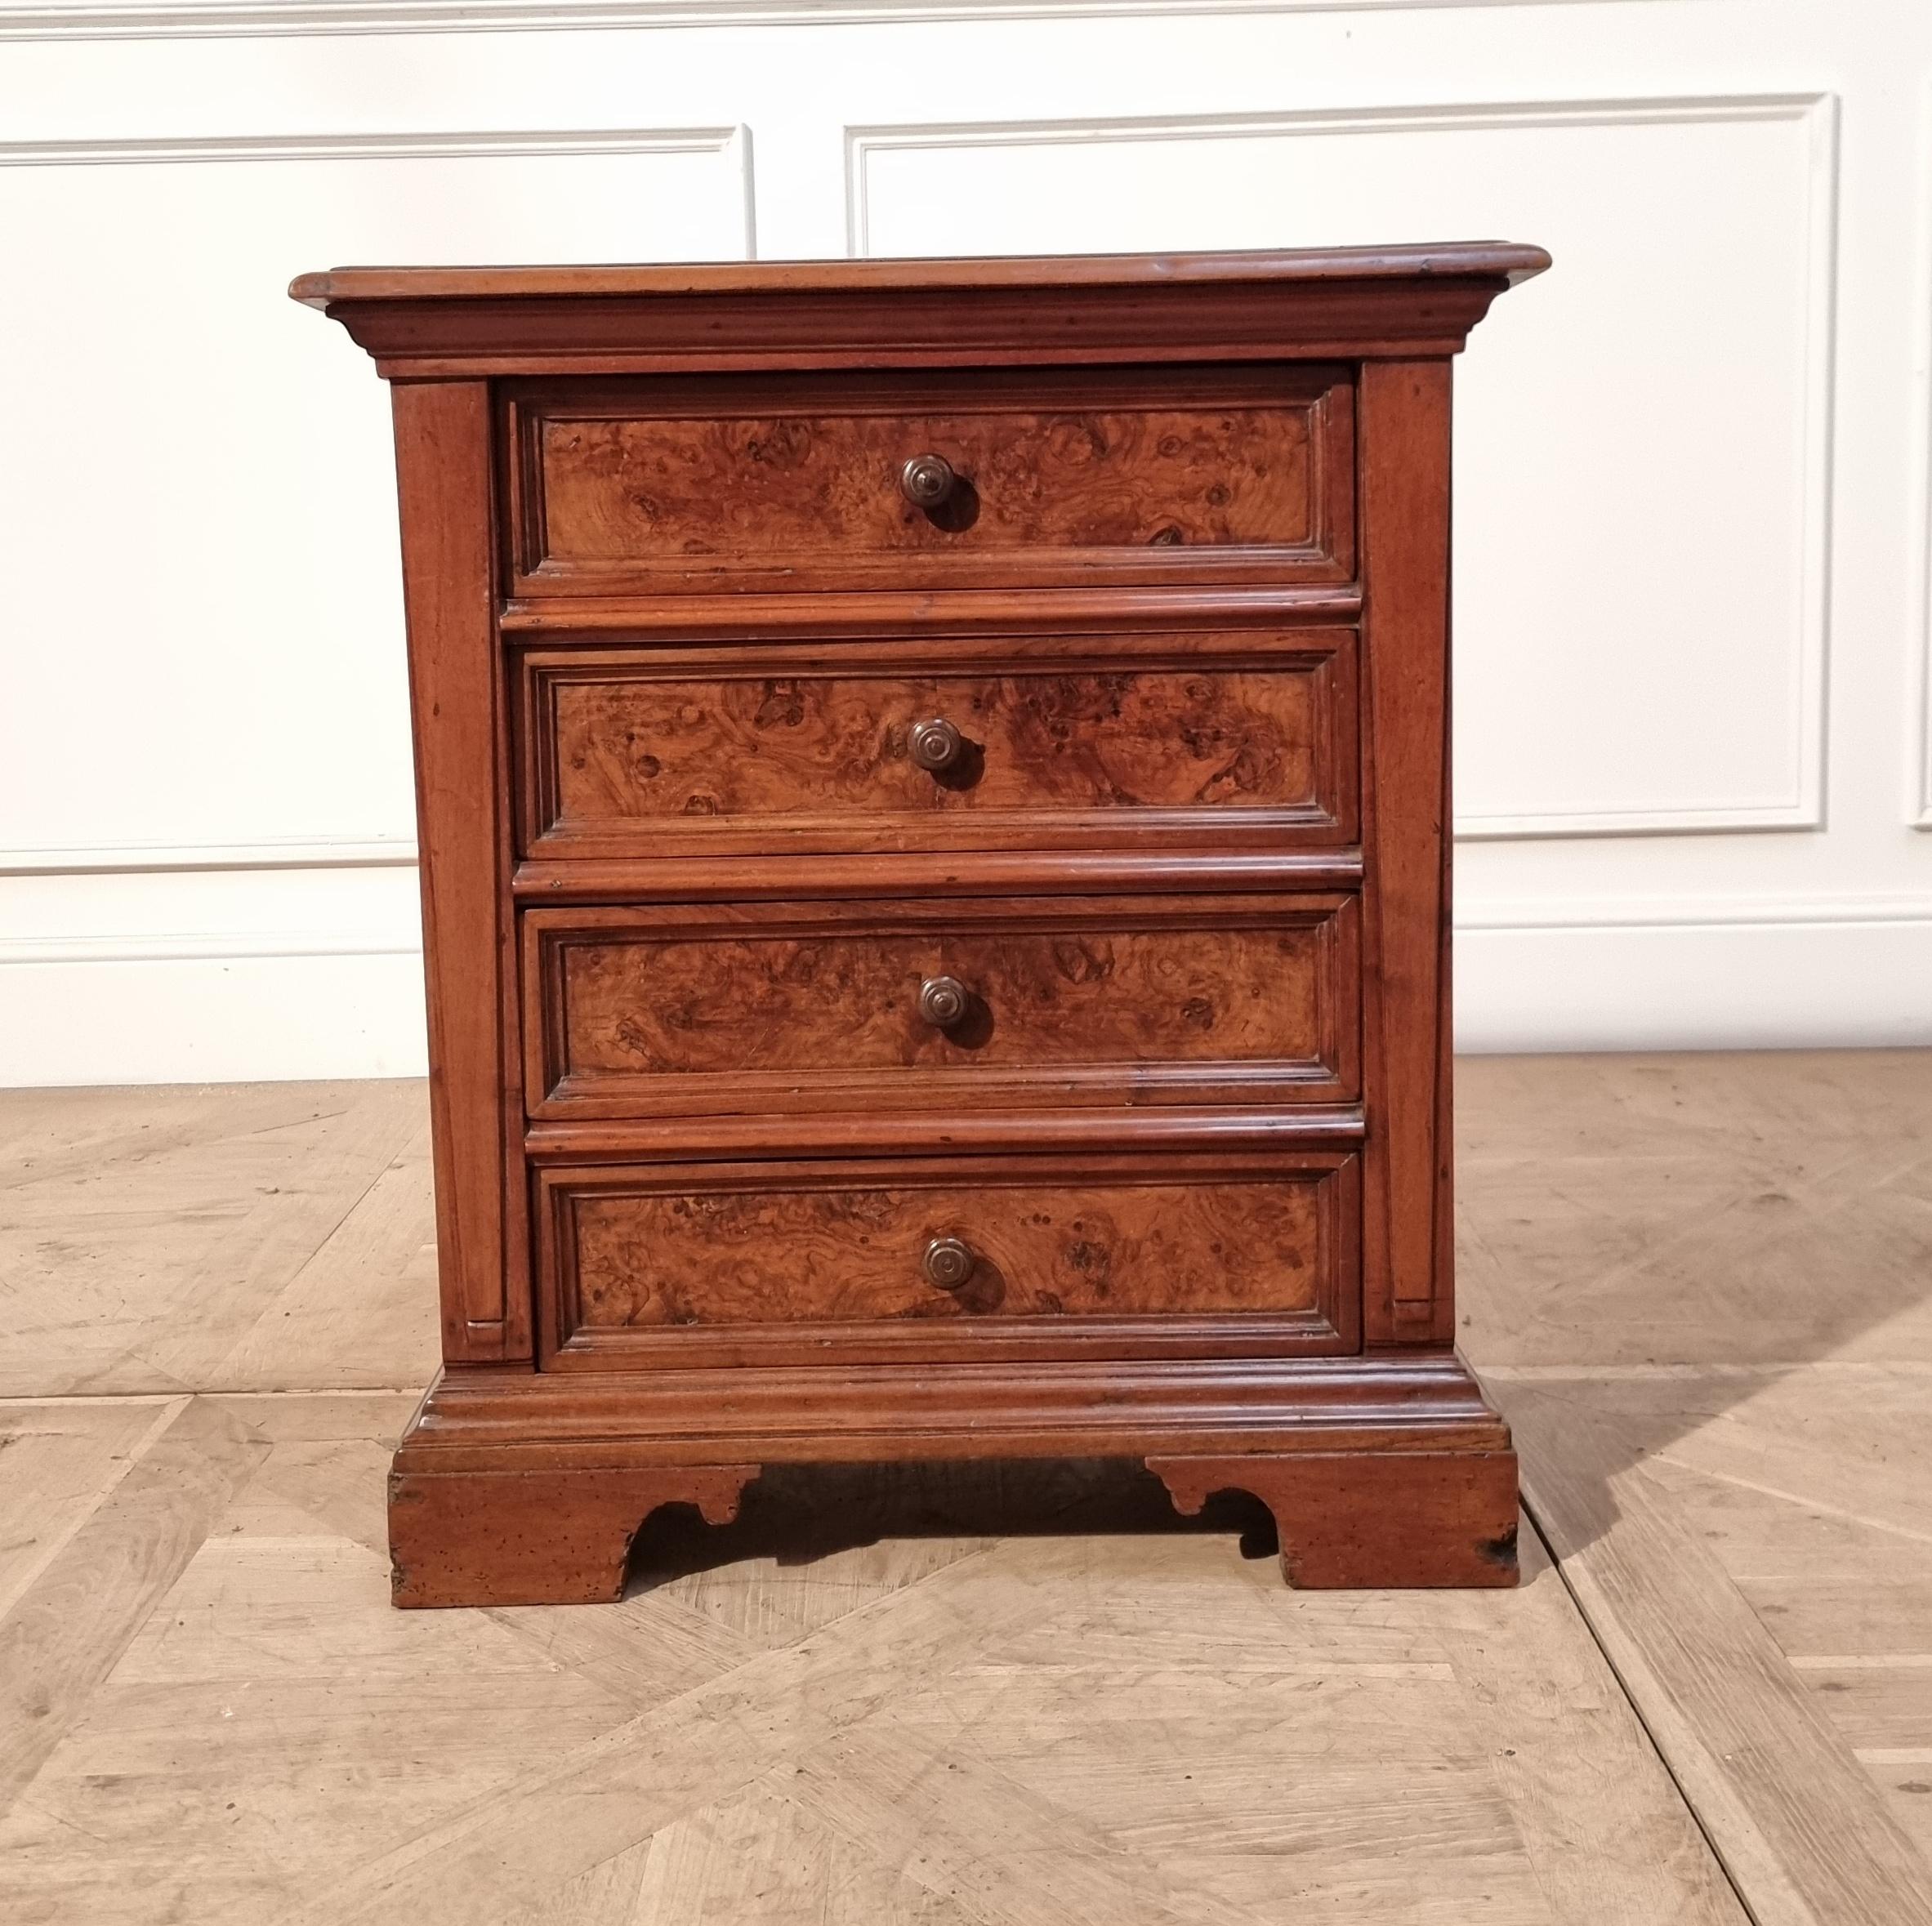 Small 19th C Italian walnut / burr walnut bedside chest of drawers. 1840.

Reference: 7654

Dimensions
27 inches (69 cms) Wide
14 inches (36 cms) Deep
30.5 inches (77 cms) High